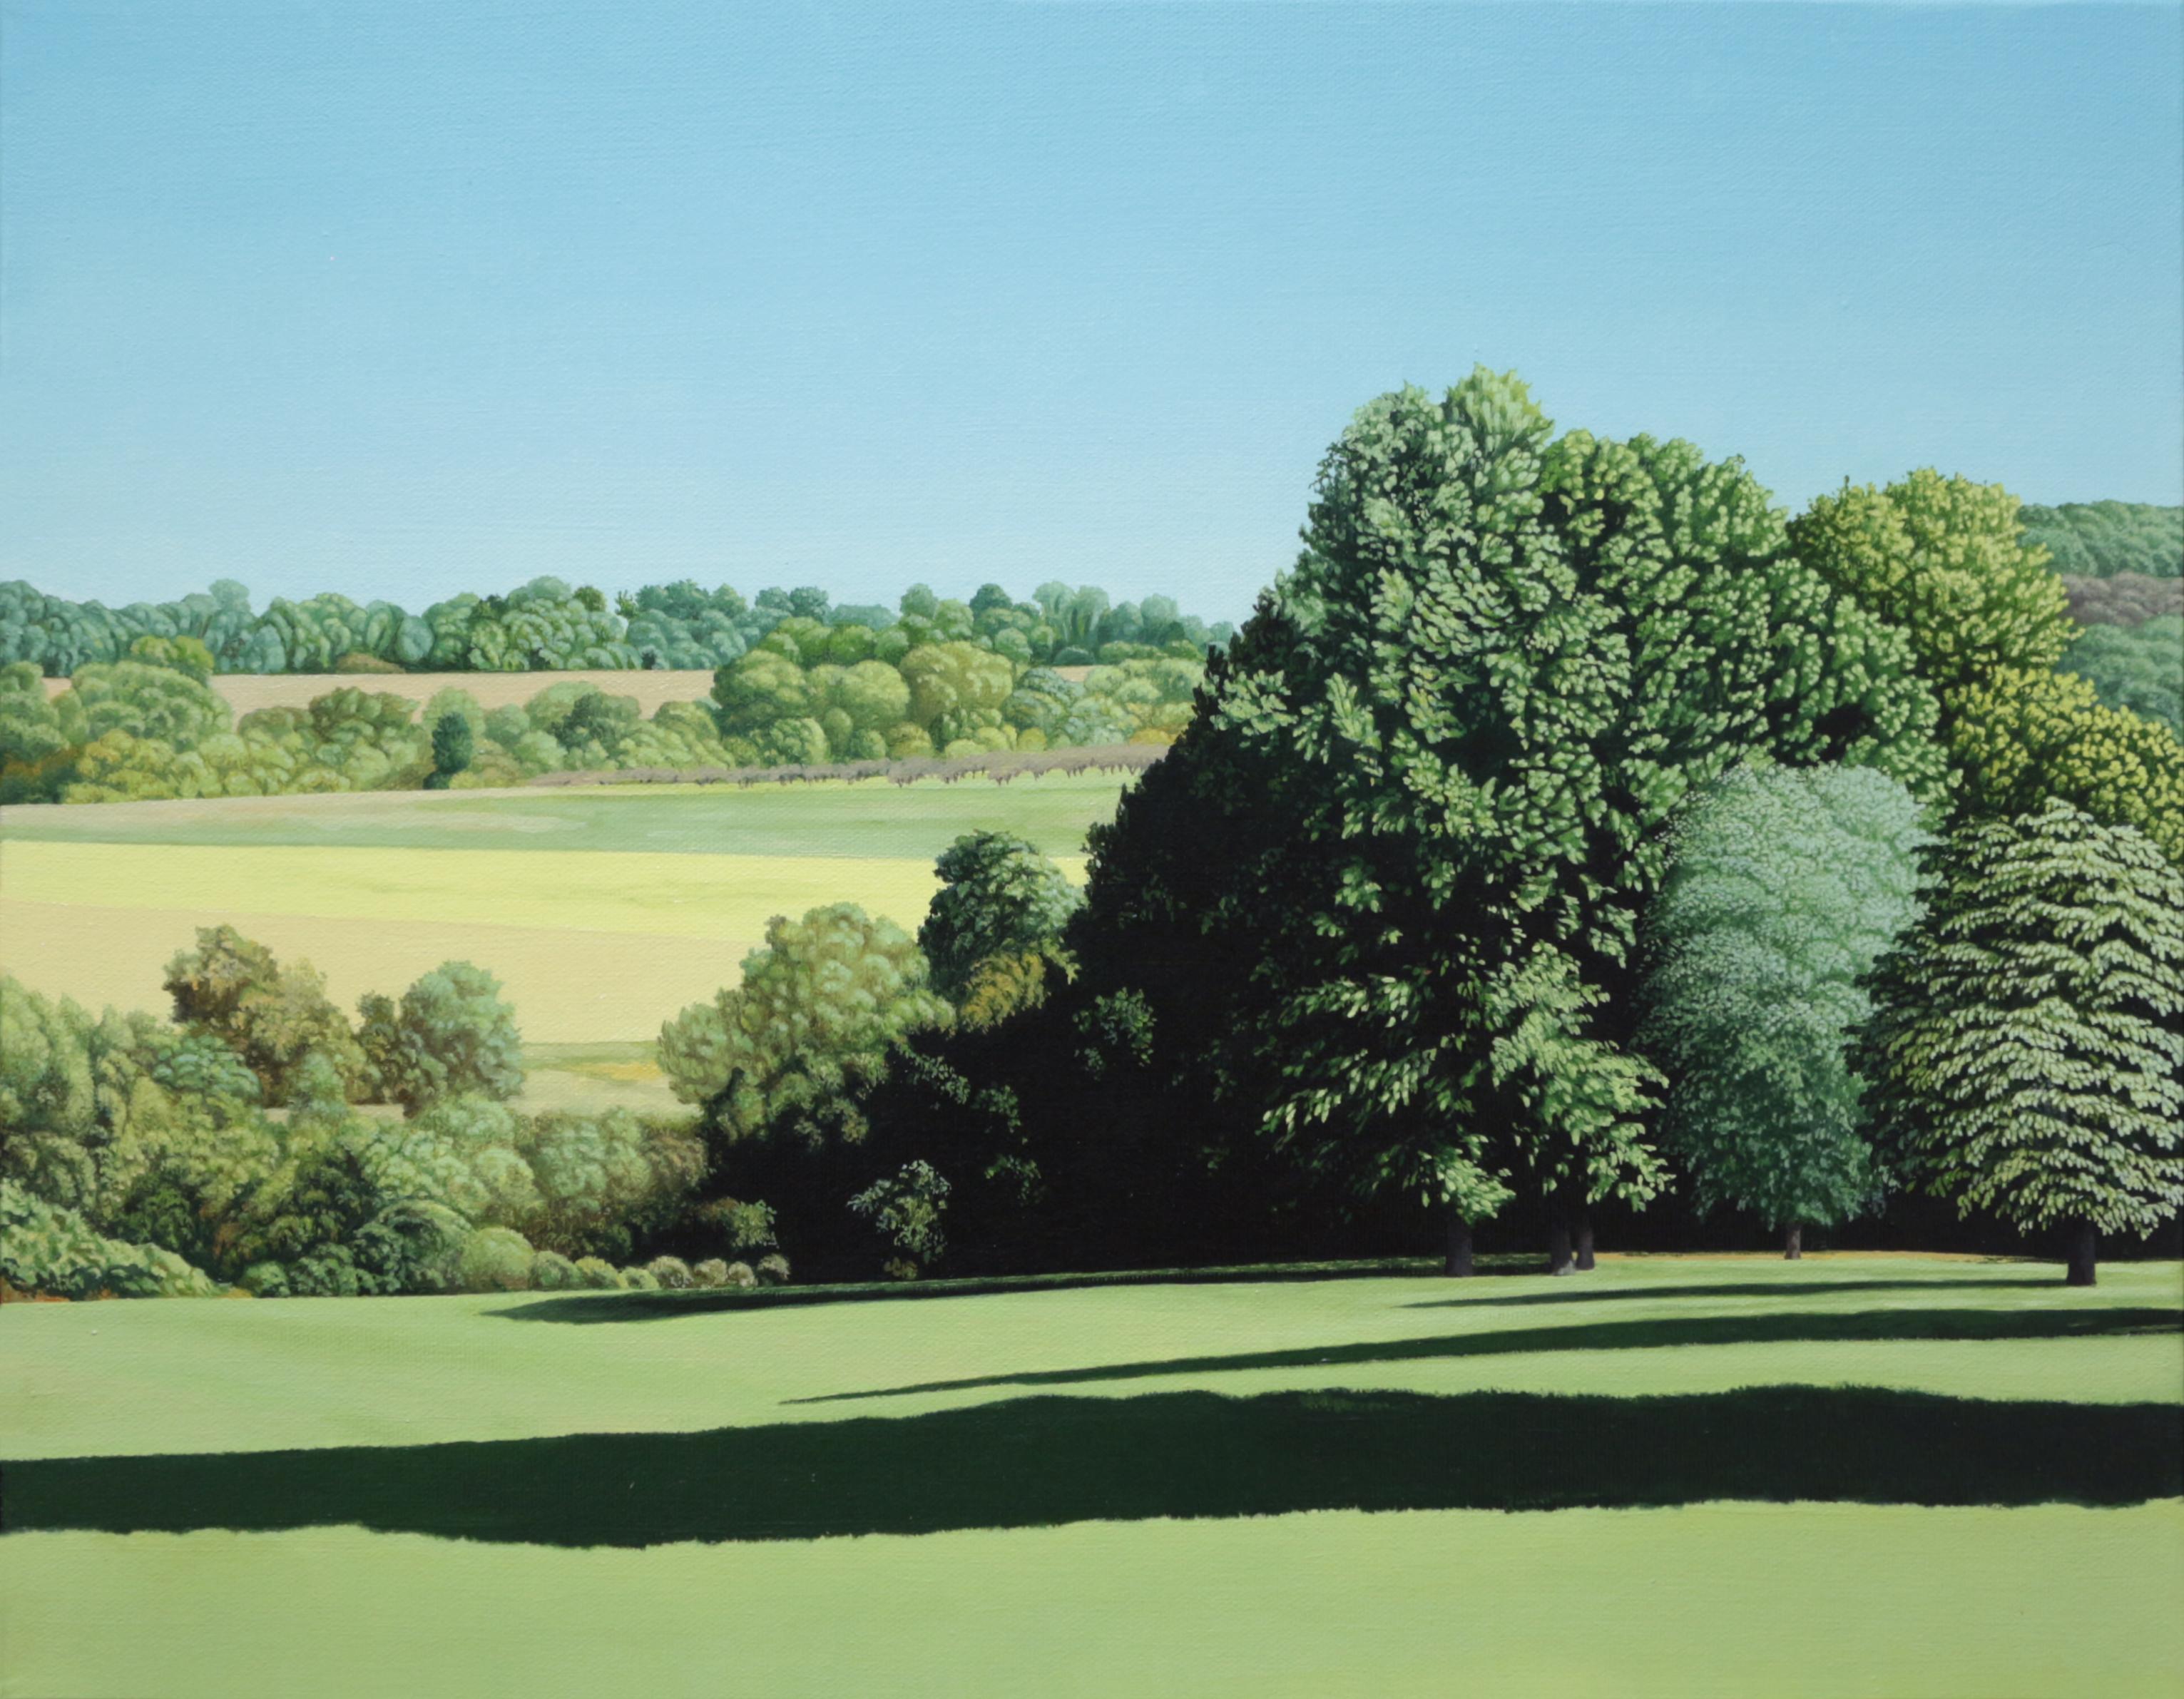 Anita Mazzucca Landscape Painting - LONG SHADOWS IN THE MORNING - Contemporary Realism / Country Park / Nature Scene